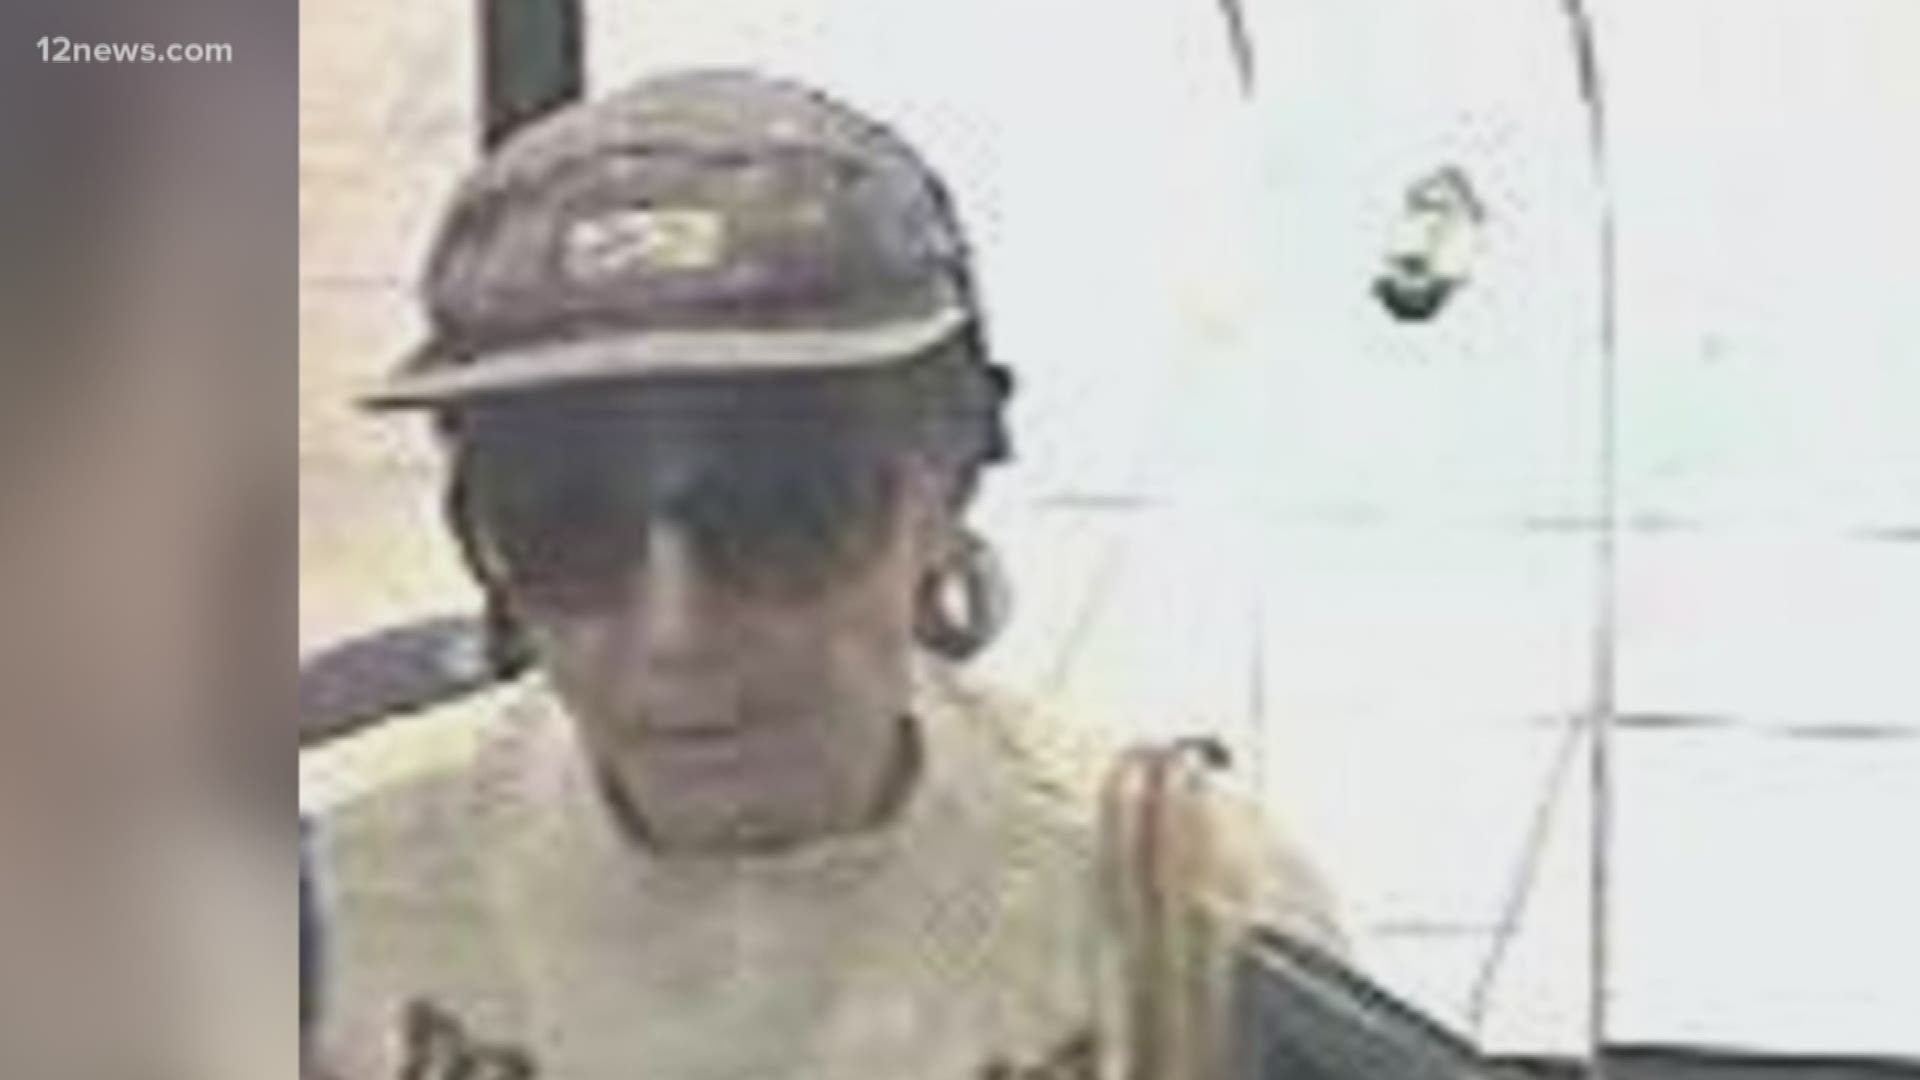 Investigators say 56-year-old Elizabeth Ainslie is believed to be a notorious bank robber the FBI dubbed the "Biddy Bandit". In each case the suspect would present a robbery demand note and flee on foot.